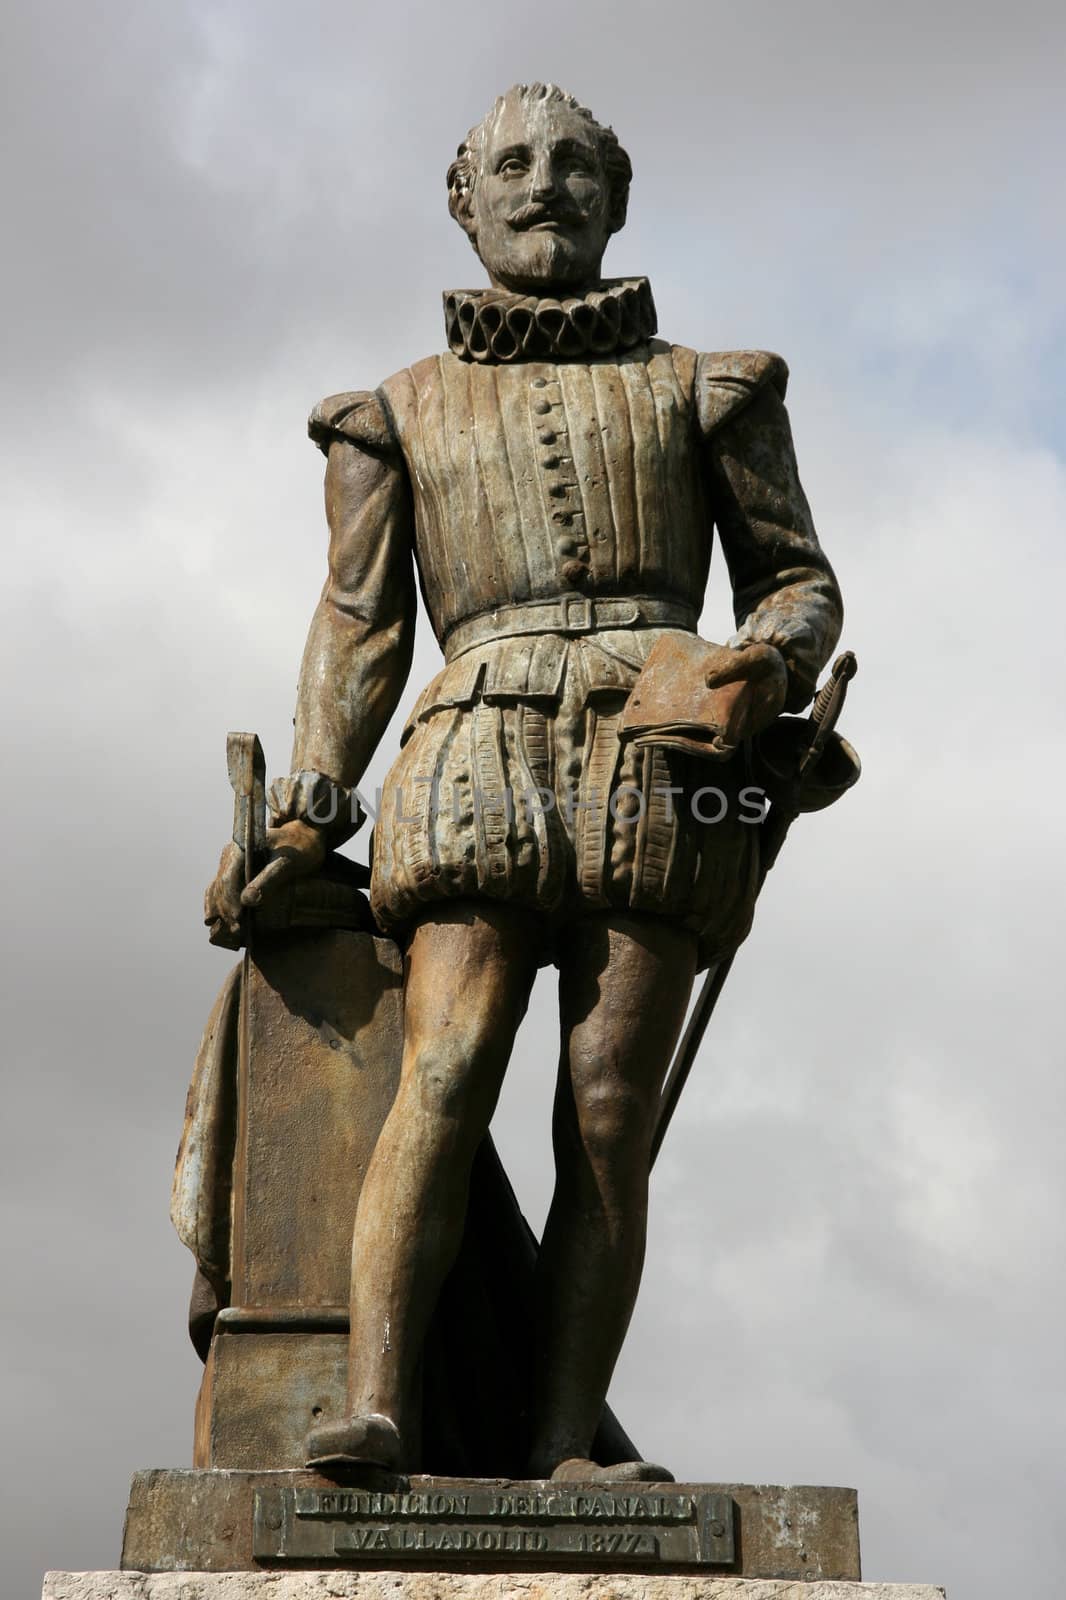 Miguel de Cervantes - famous Spanish novelist, poet and playwright. Statue in Valladolid, Spain.